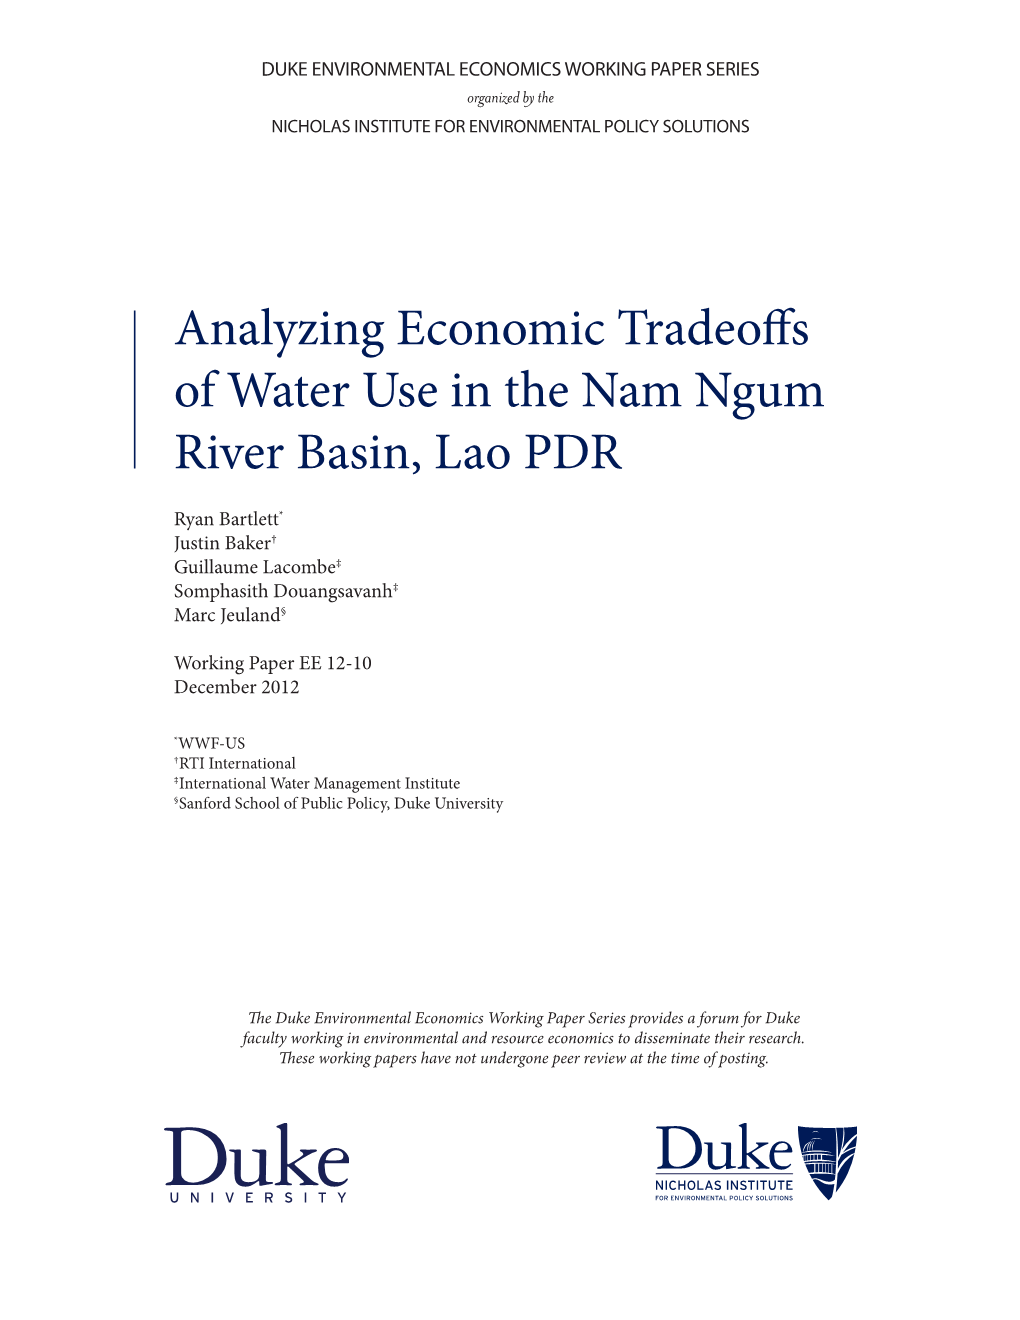 Analyzing Economic Tradeoffs of Water Use in the Nam Ngum River Basin, Lao PDR